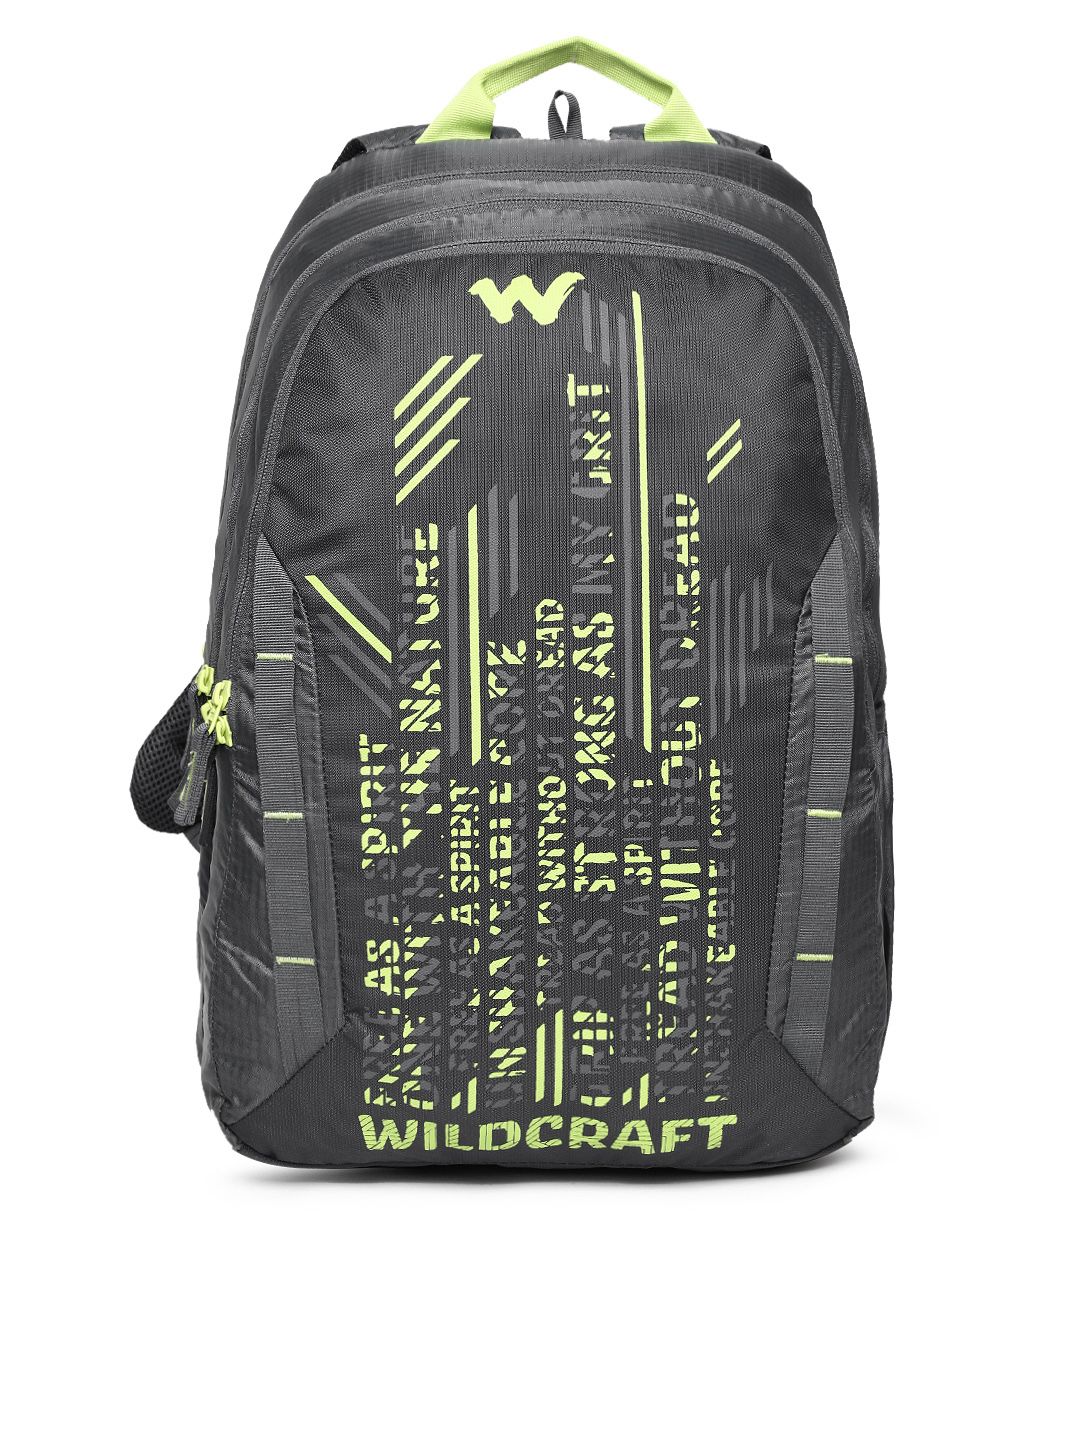 Wildcraft Unisex Black & Green Graphic Backpack Price in India